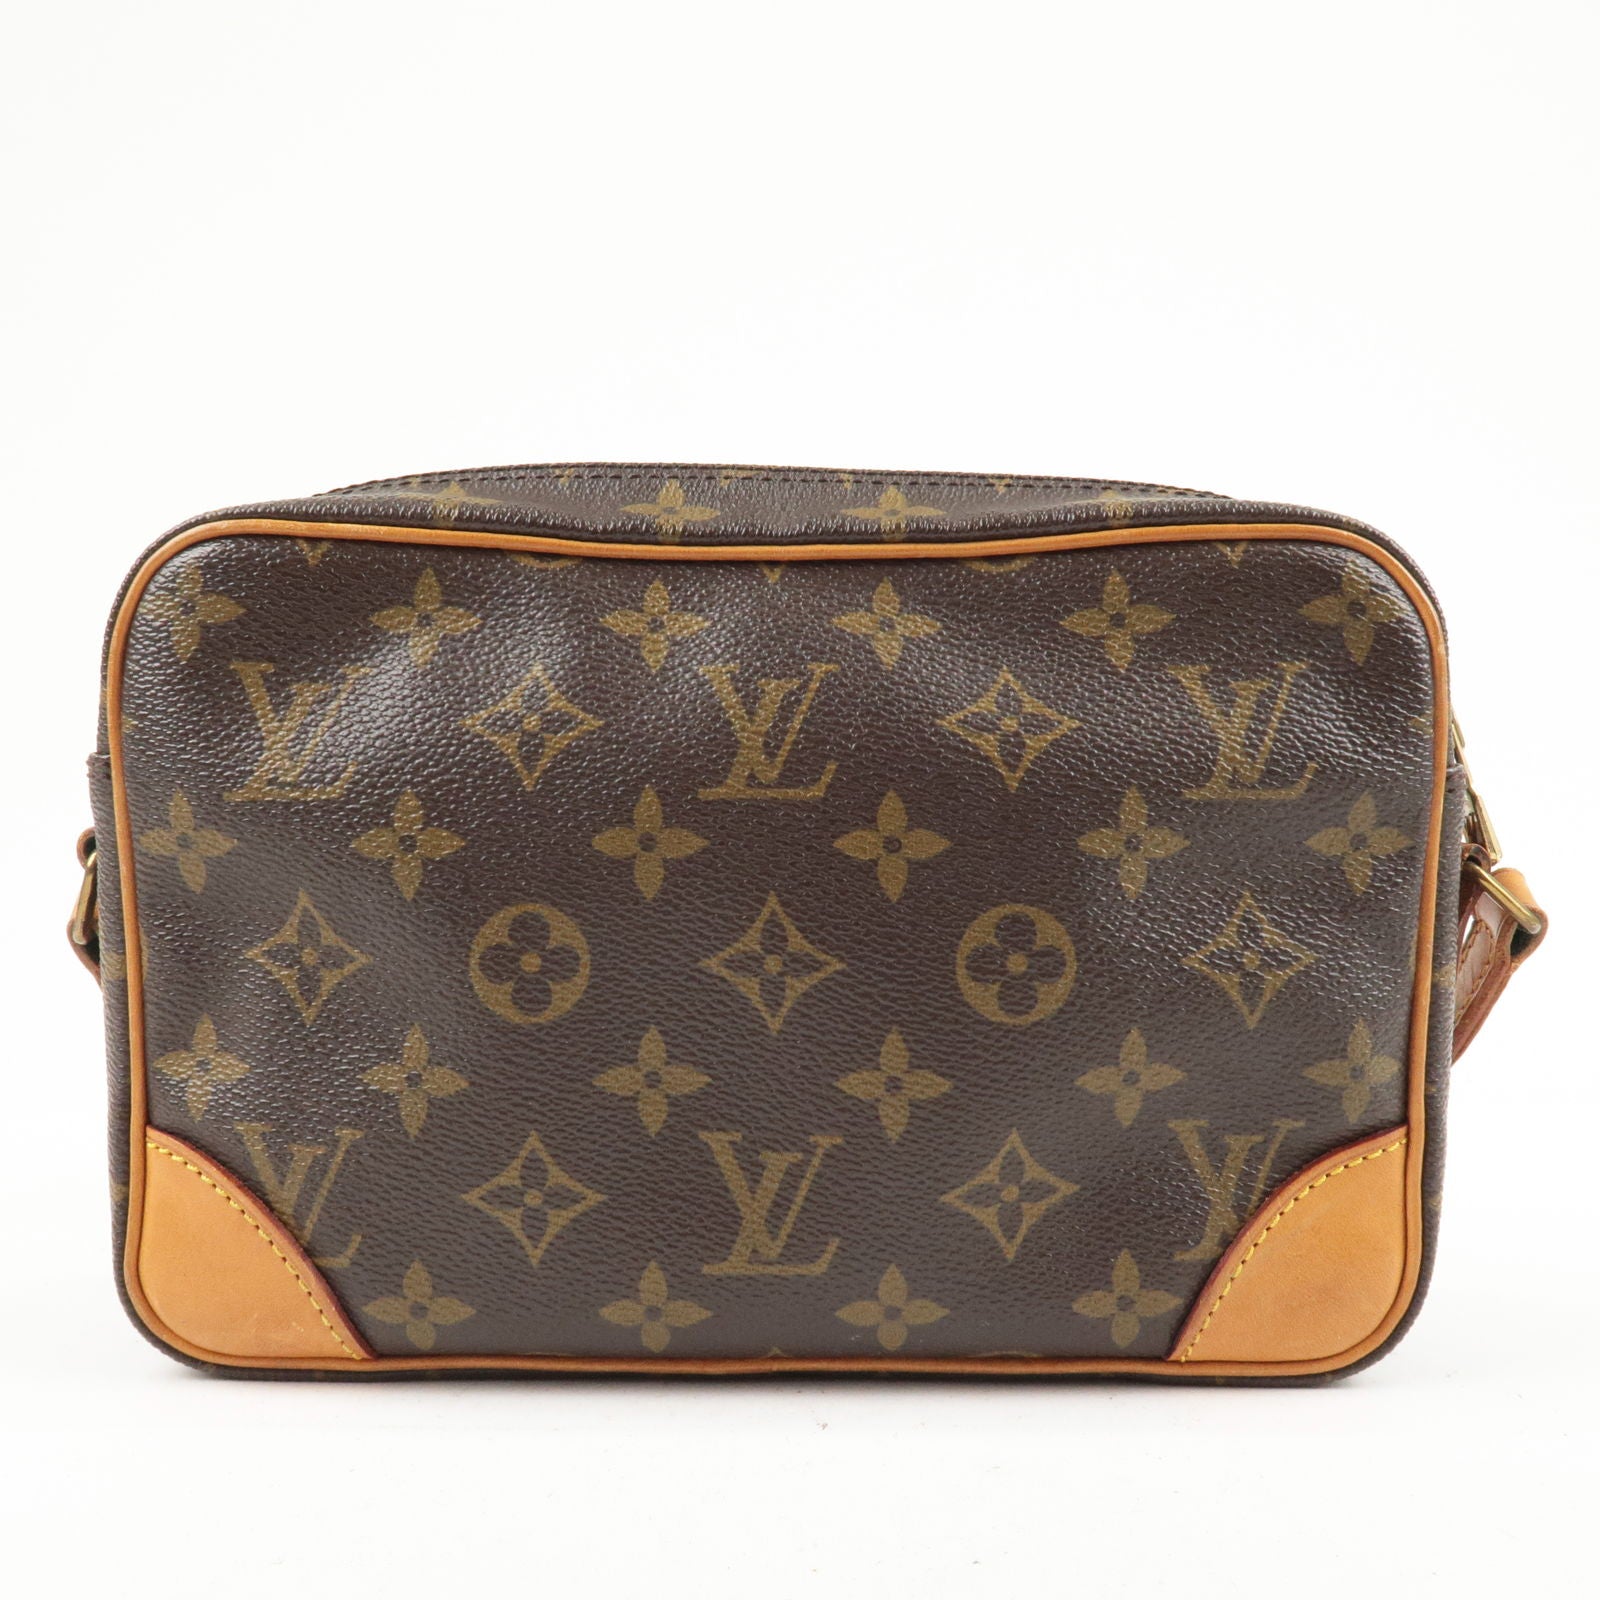 Vintage Louis Vuitton Trocadero Bag With Monogram From the -  Finland